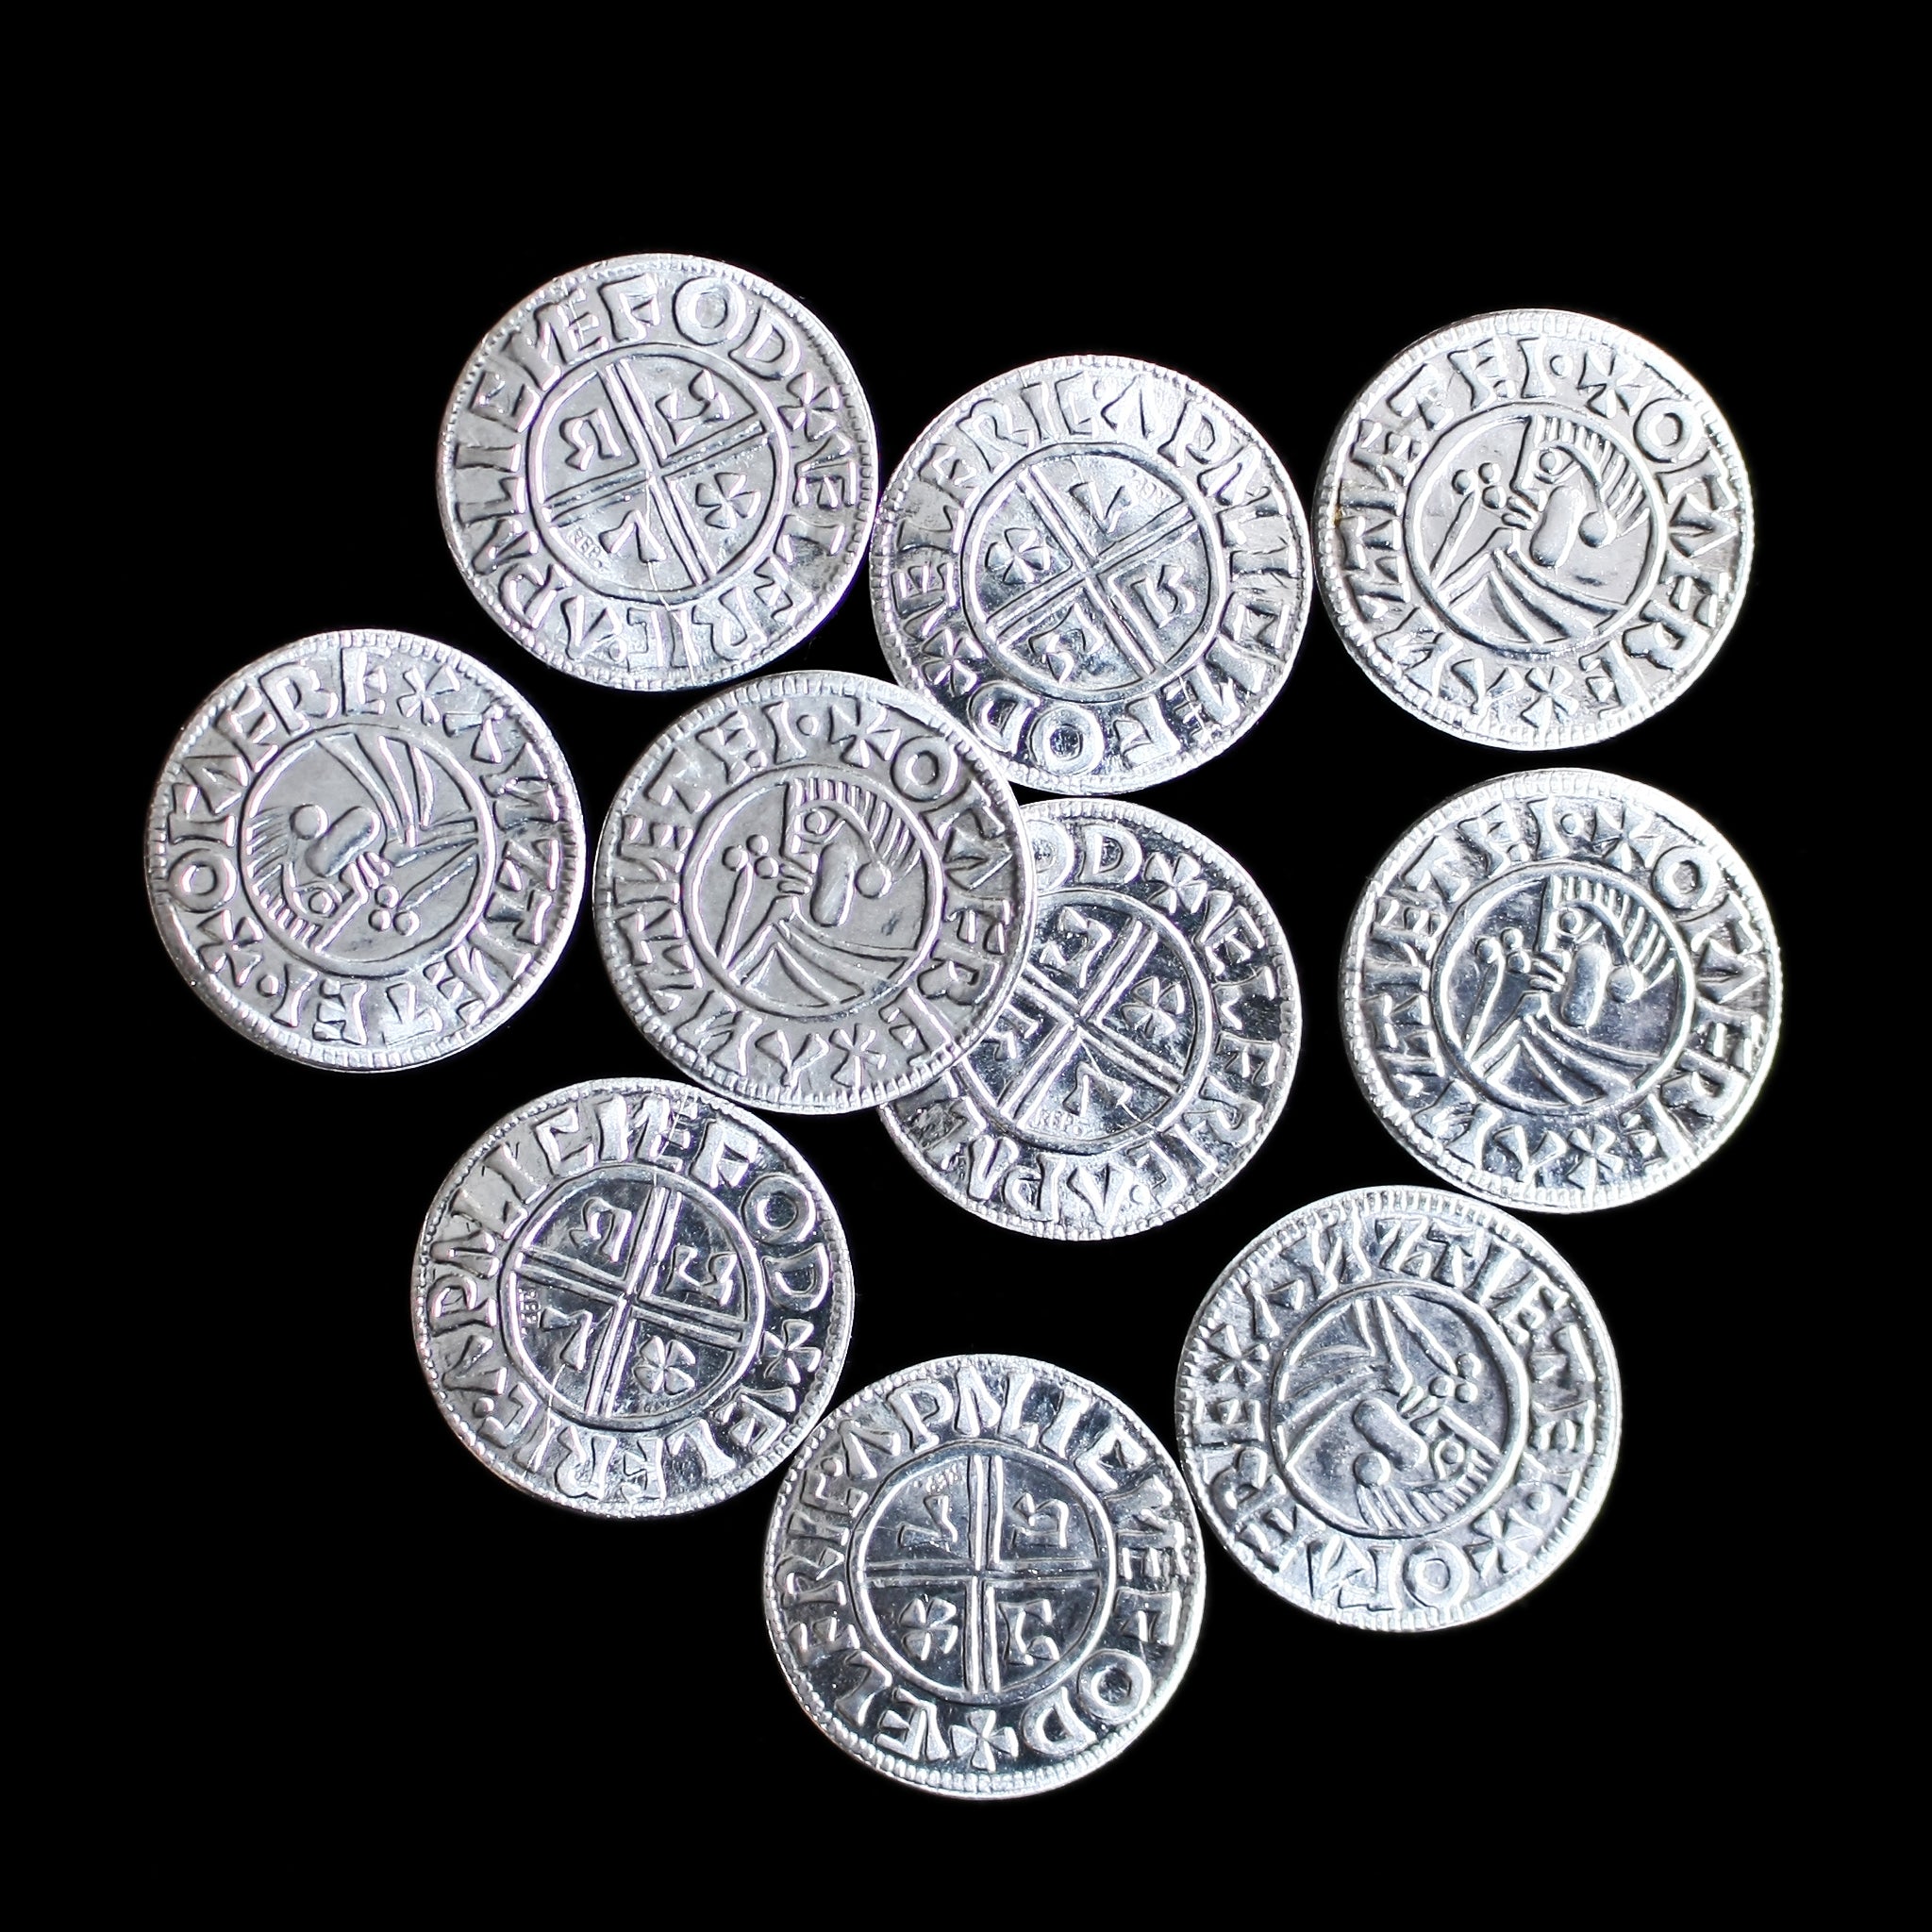 Aethelred Replica Saxon Coins from Winchester